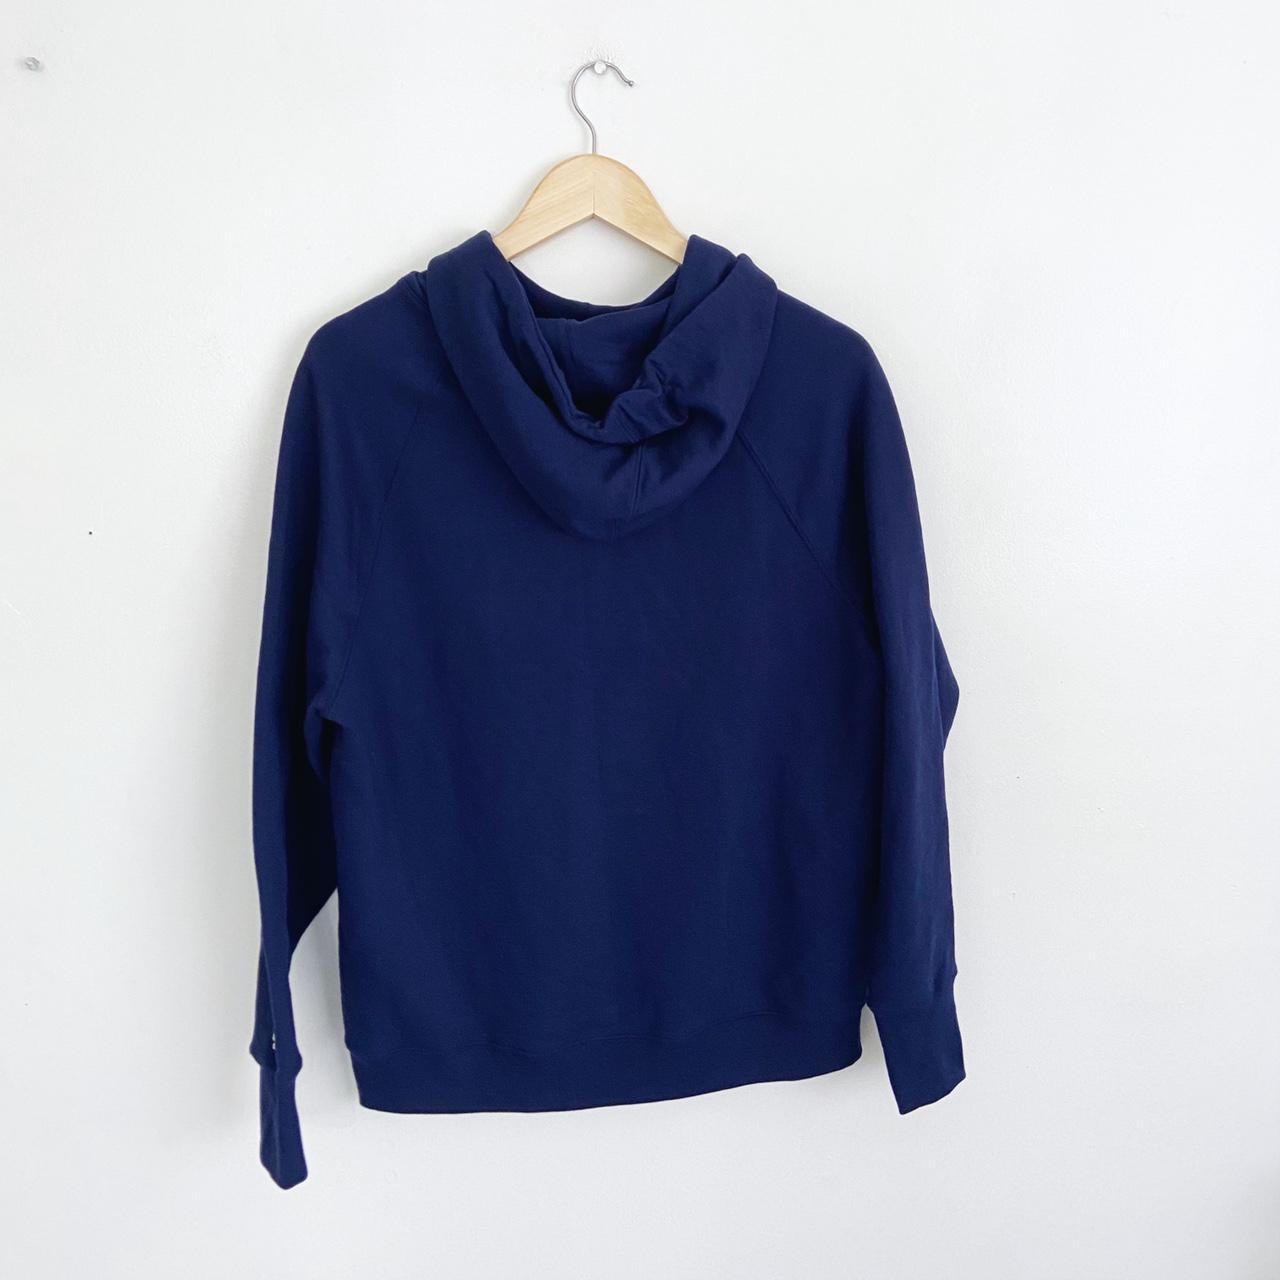 Product Image 2 - NWT Champion Navy Blue Powerblend